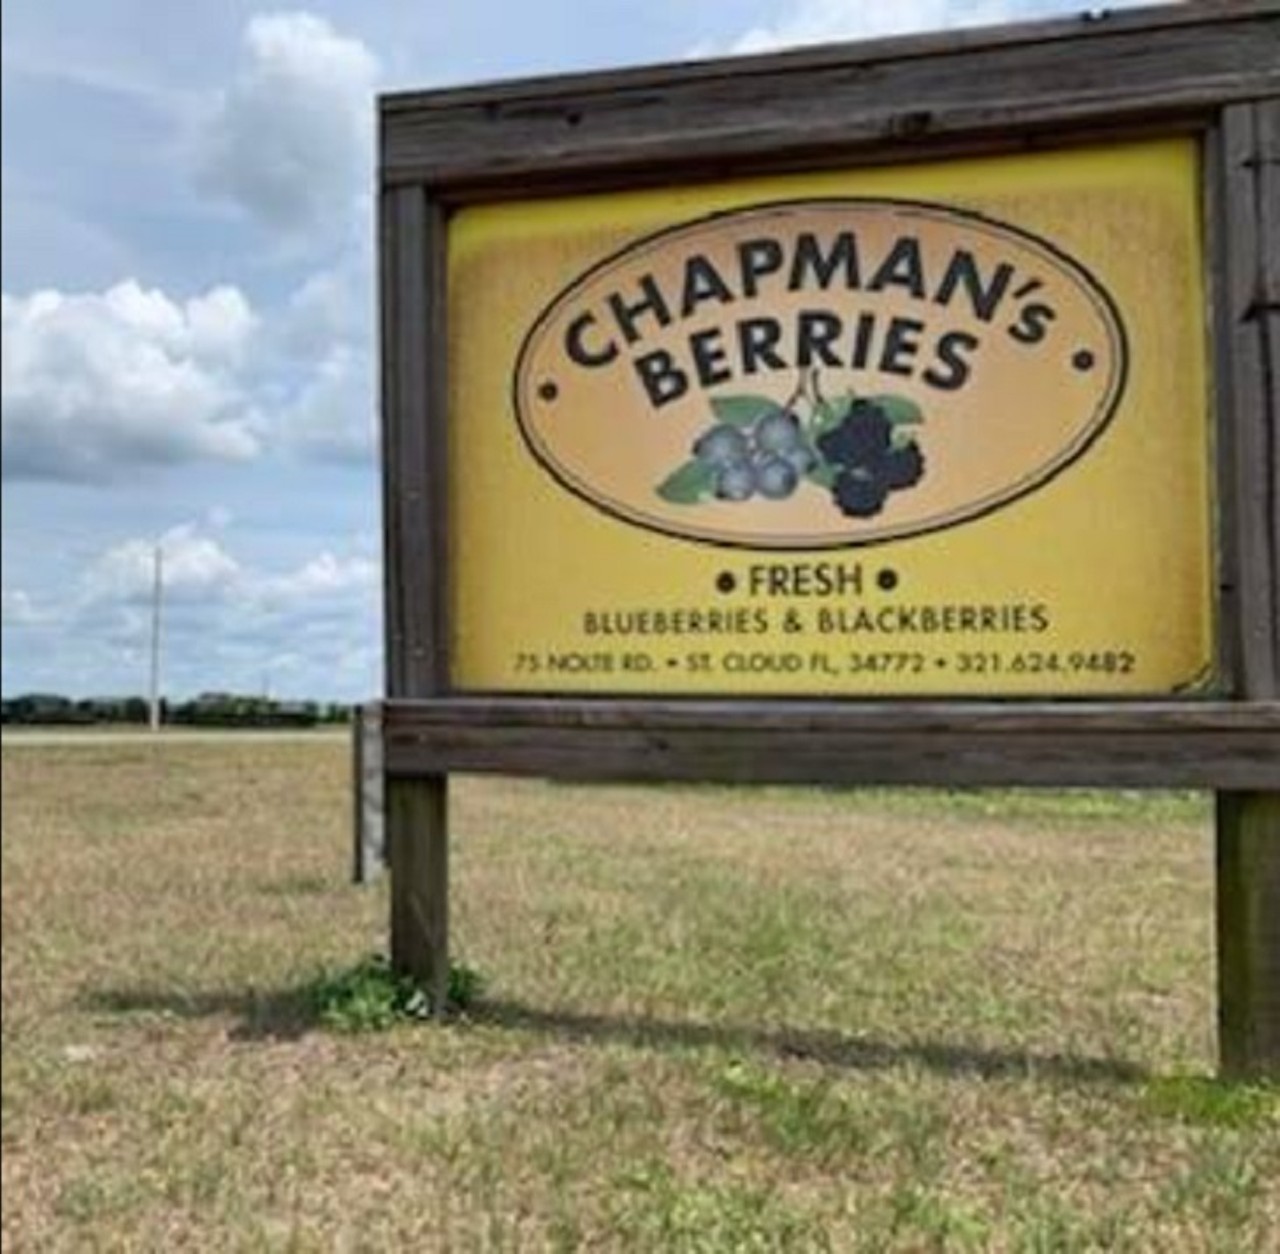 Chapman&#146;s Berries 
75 Nolte Road, Saint Cloud
Though they haven&#146;t opened up yet, Chapman&#146;s announced in late February that it wouldn&#146;t be long until their scrumptious blueberries were ripe for the picking.
Photo via Chapman&#146;s Berries/Facebook